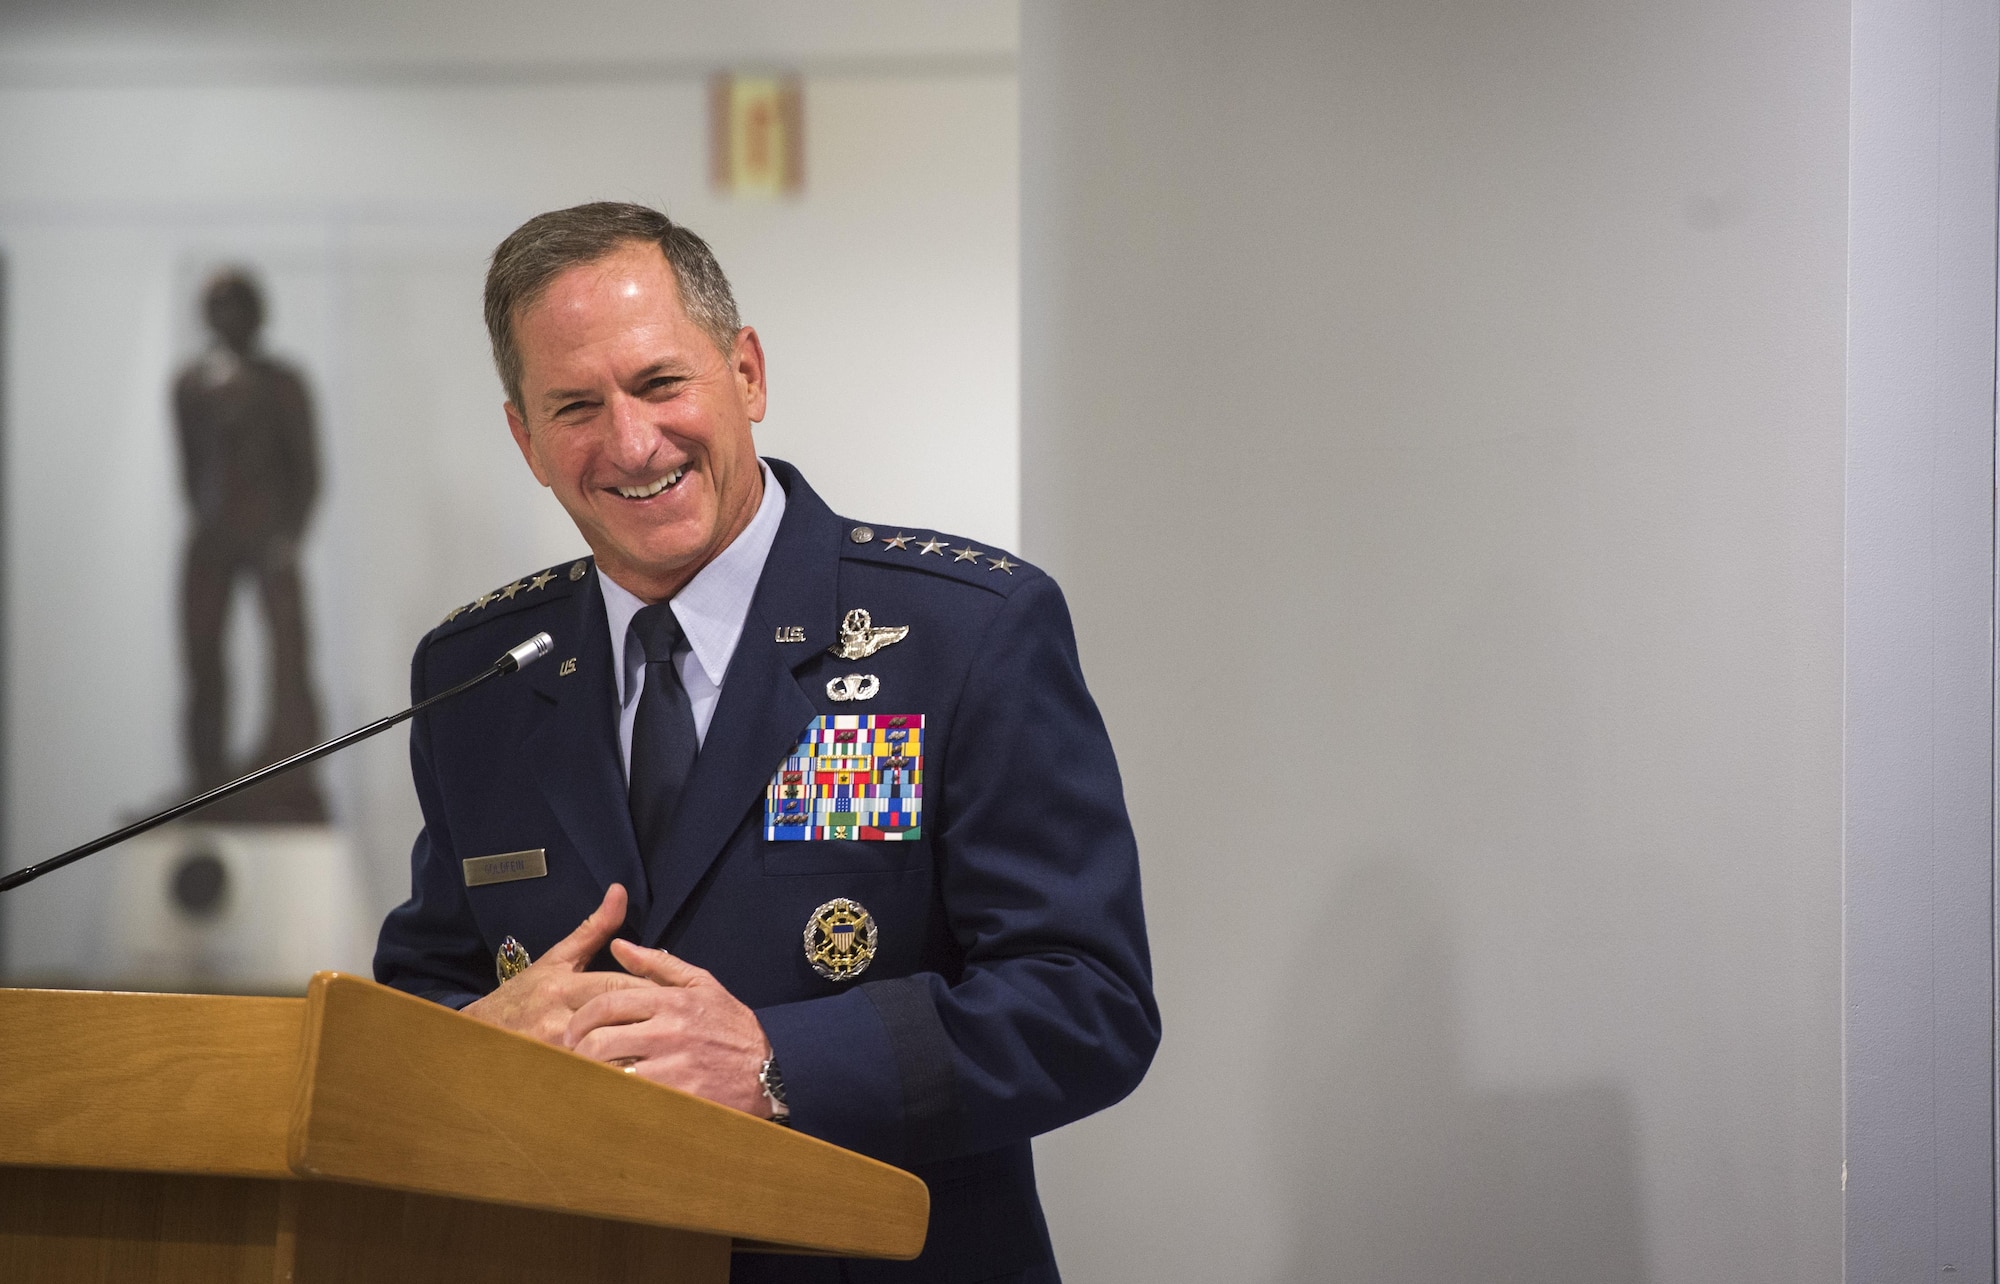 Air Force Chief of Staff Gen. David L. Goldfein speaks during the official portrait unveiling for retired Gen. Mark A. Welsh III, former Air Force chief of staff, in the Pentagon, Washington, D.C., Sept. 14, 2017. Welsh served as the 20th chief of staff from 2012 to 2016. (DoD photo by Tech. Sgt. Brigitte N. Brantley)